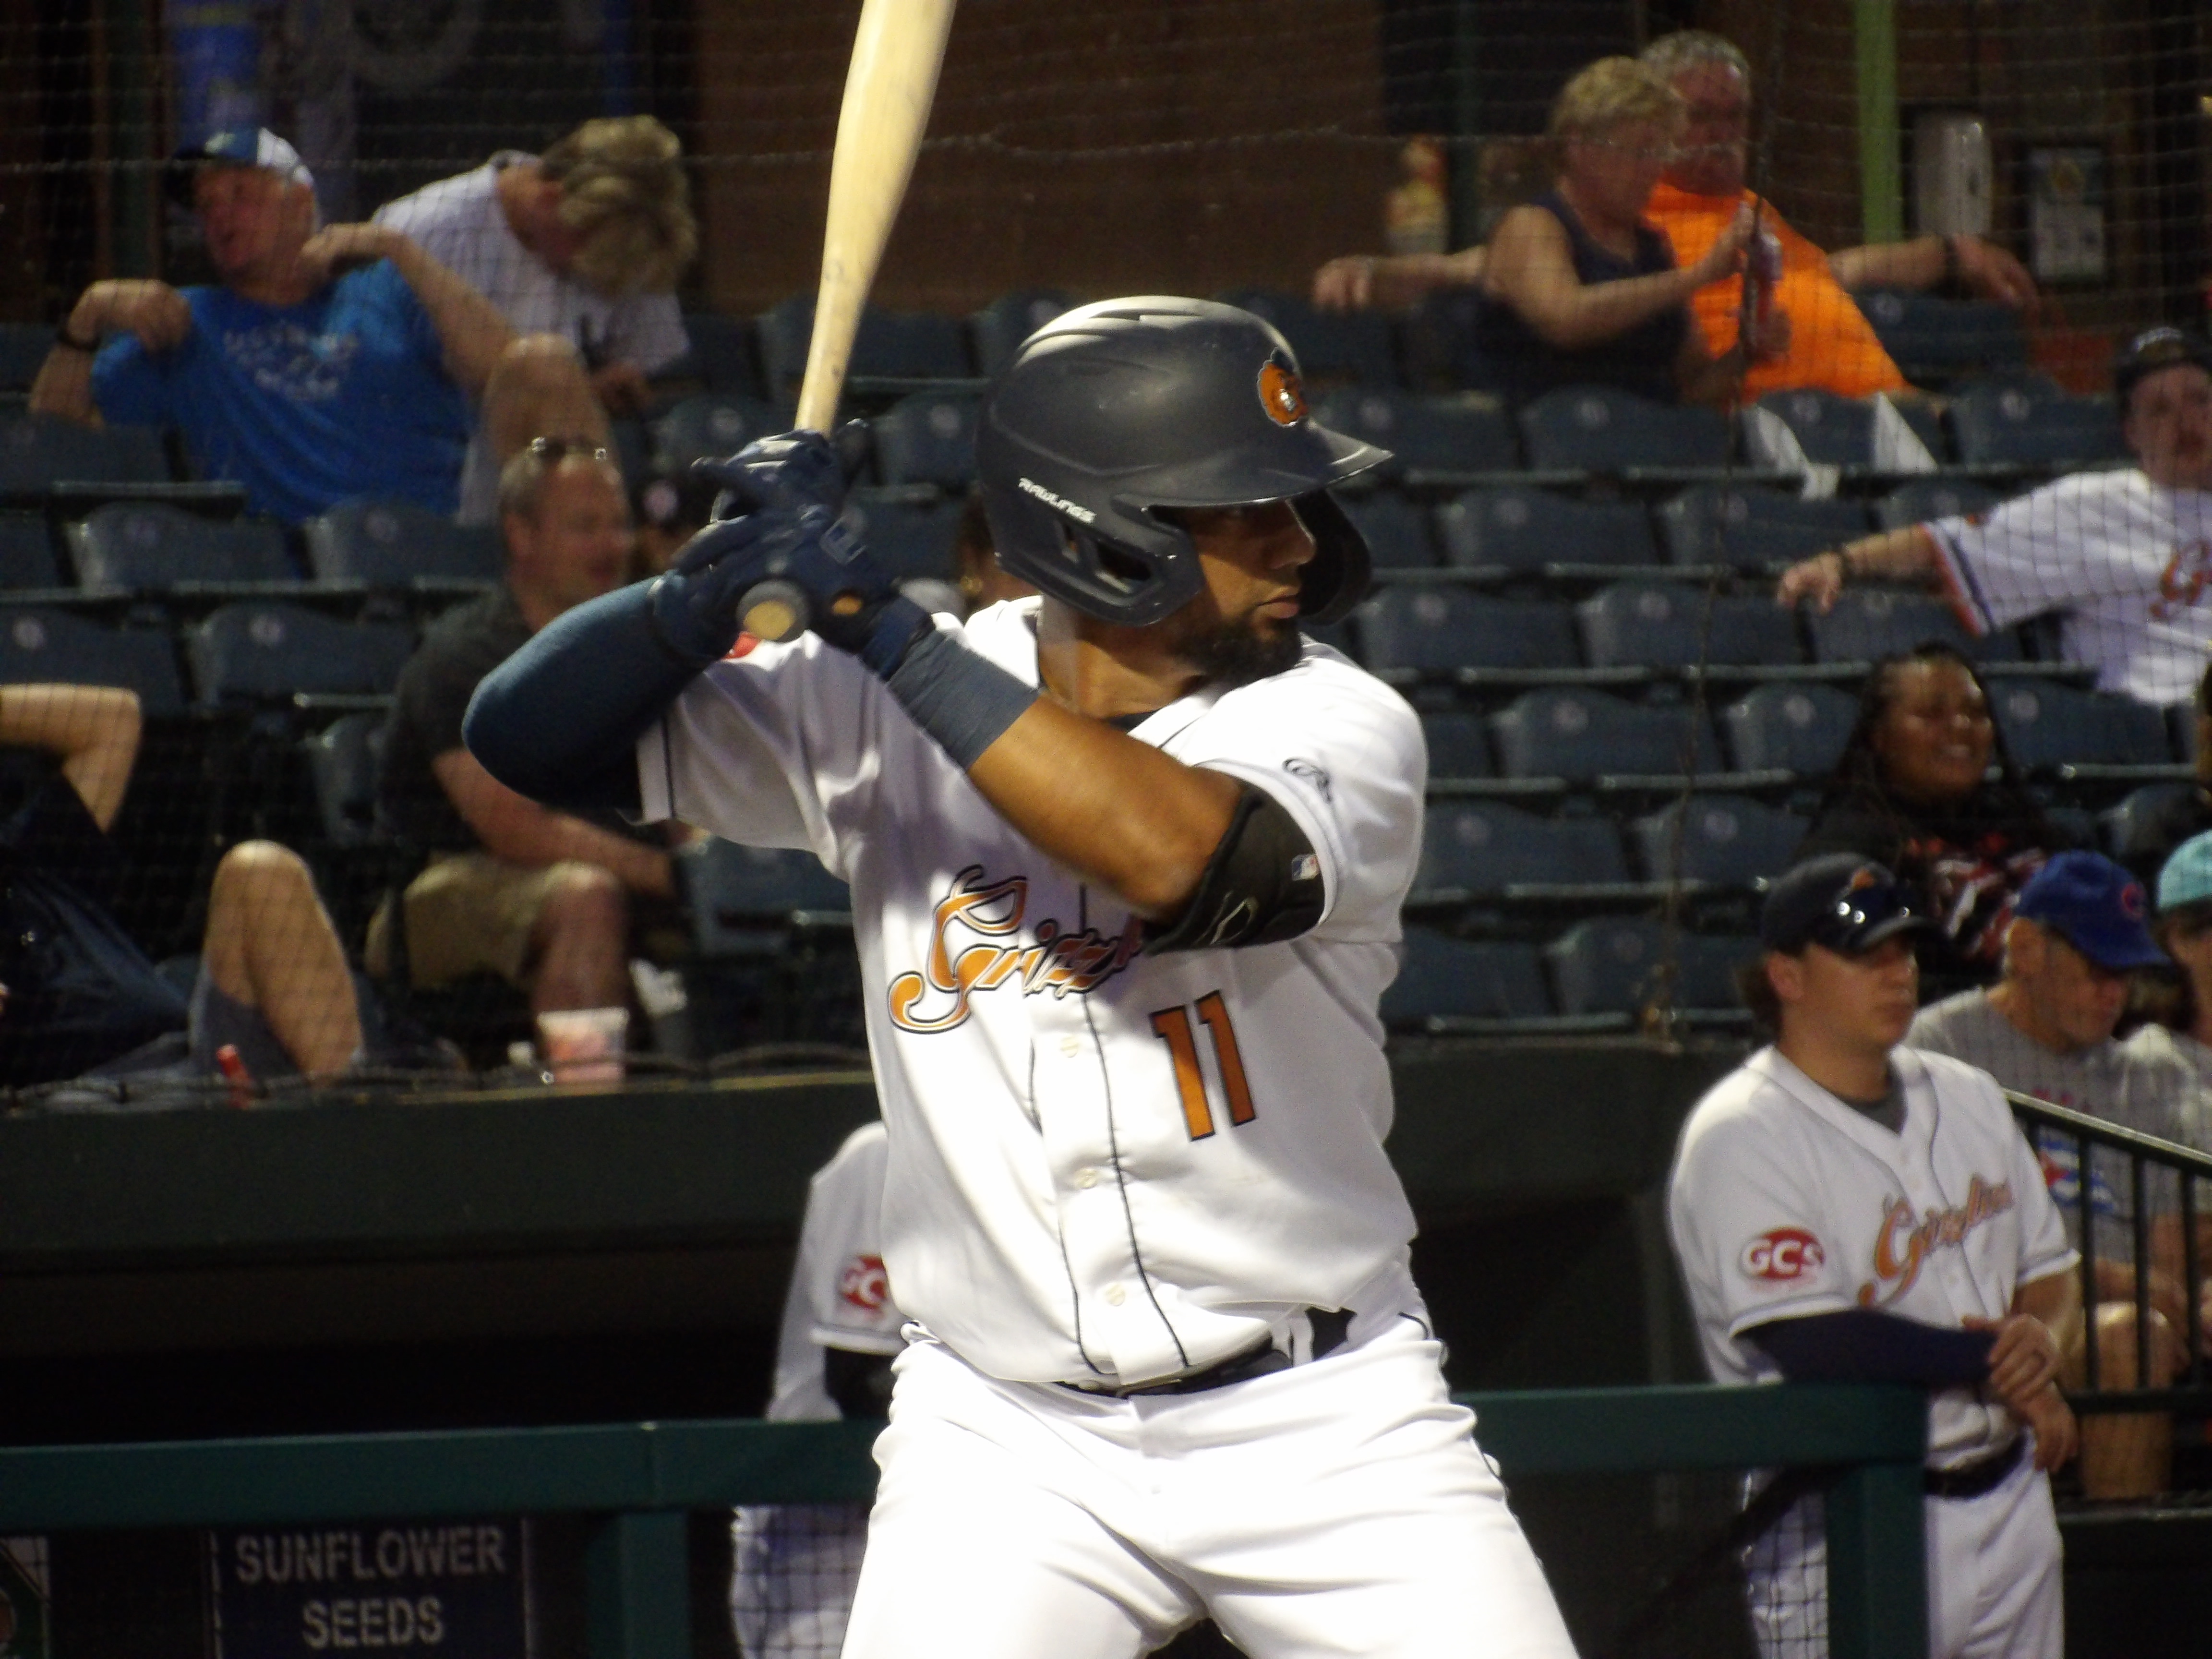 Rosario’s 4 Hits, 7 RBIs Lift Grizzlies To Big Win Over Windy City